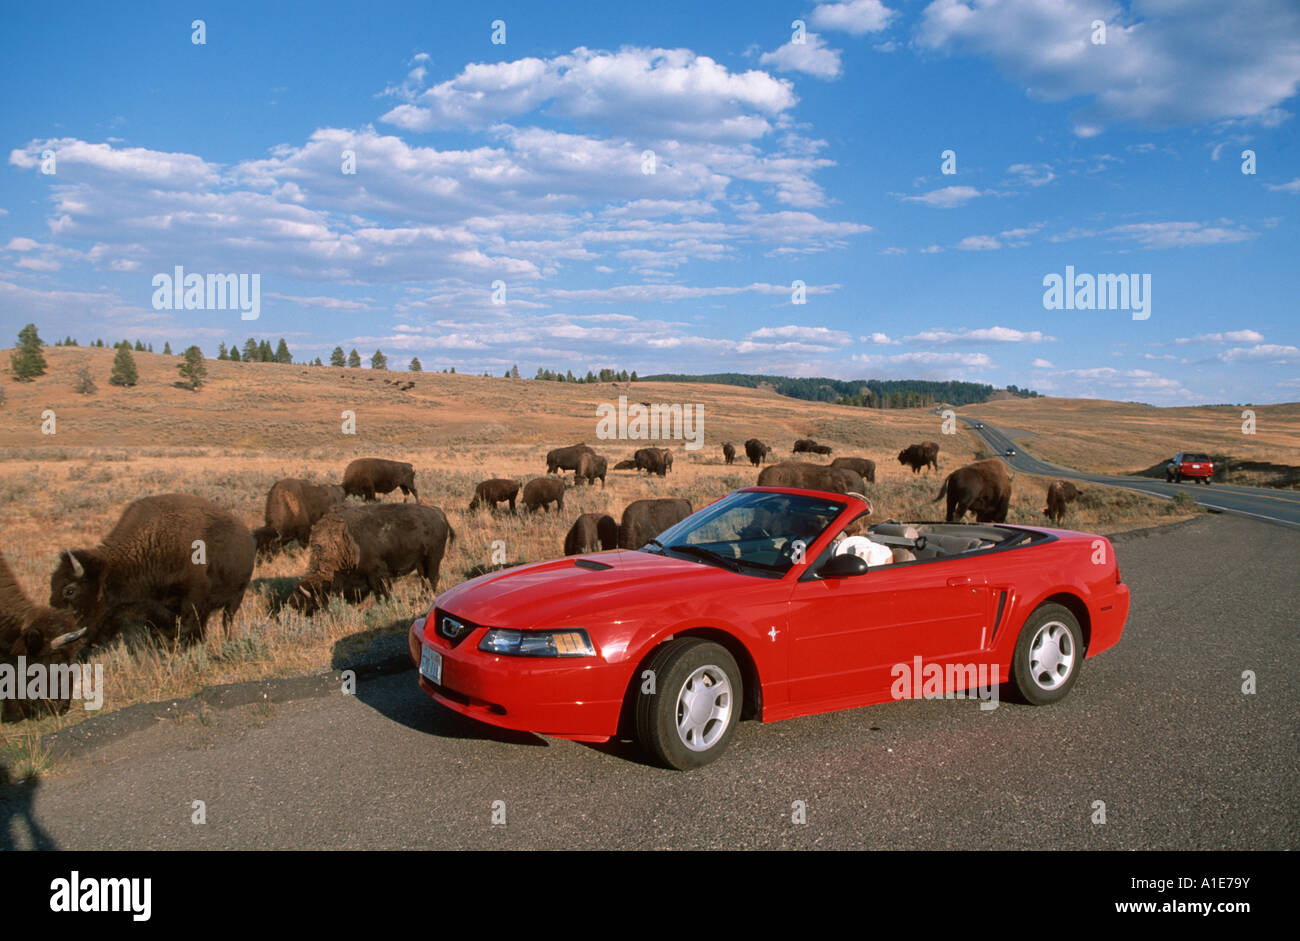 American bison, buffalo (Bison bison), grazing at the road side, USA, Wyoming, Yellowstone NP Stock Photo